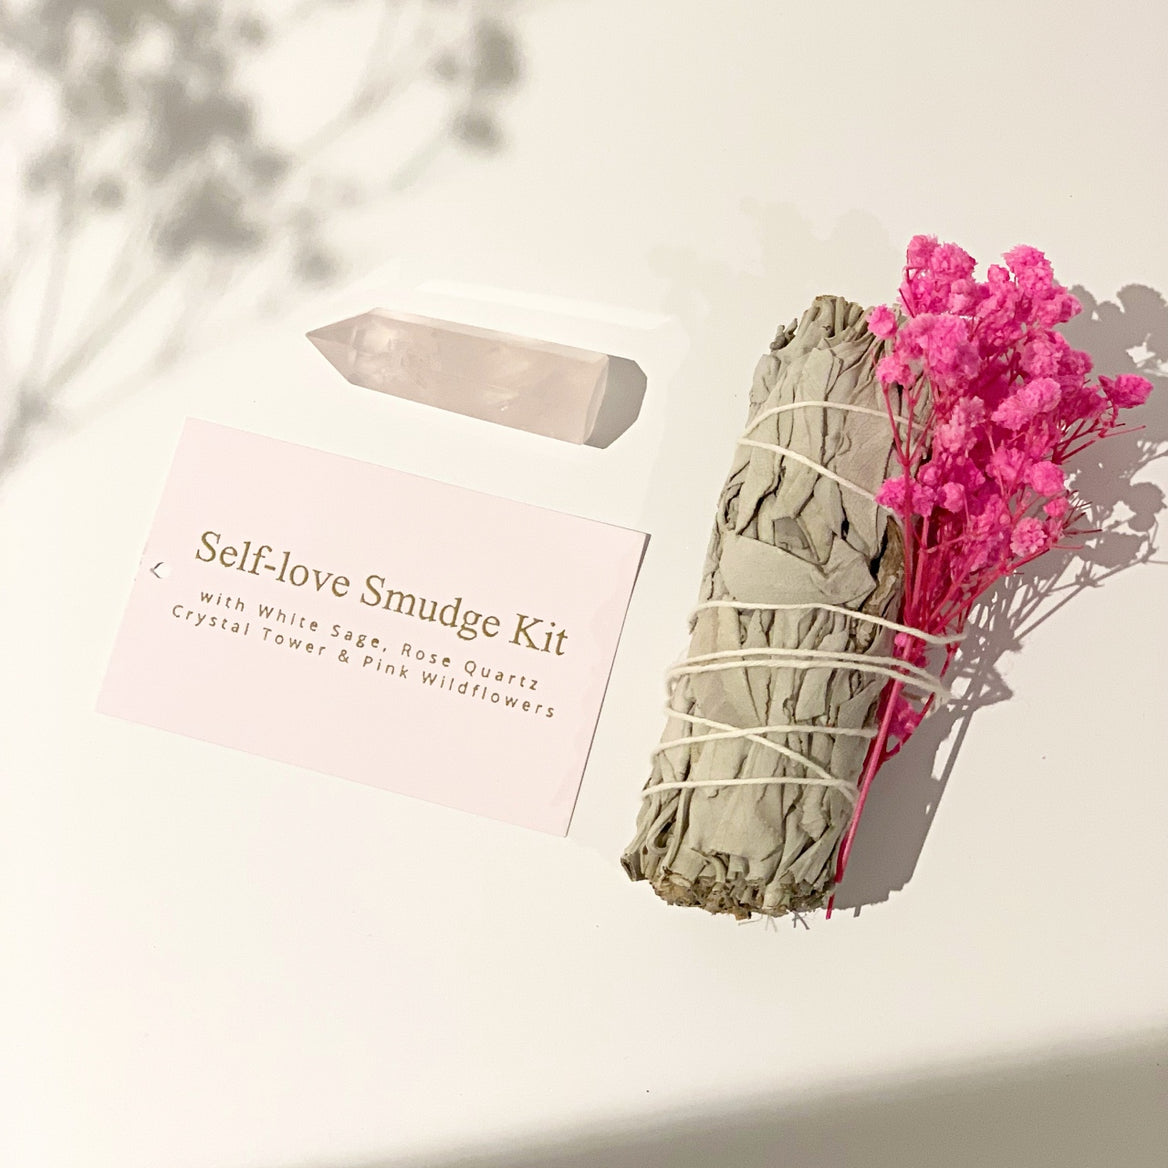 Self-love Smudge Kit - White Sage Smudge with Rose Quartz Tower & Pink Wildflowers